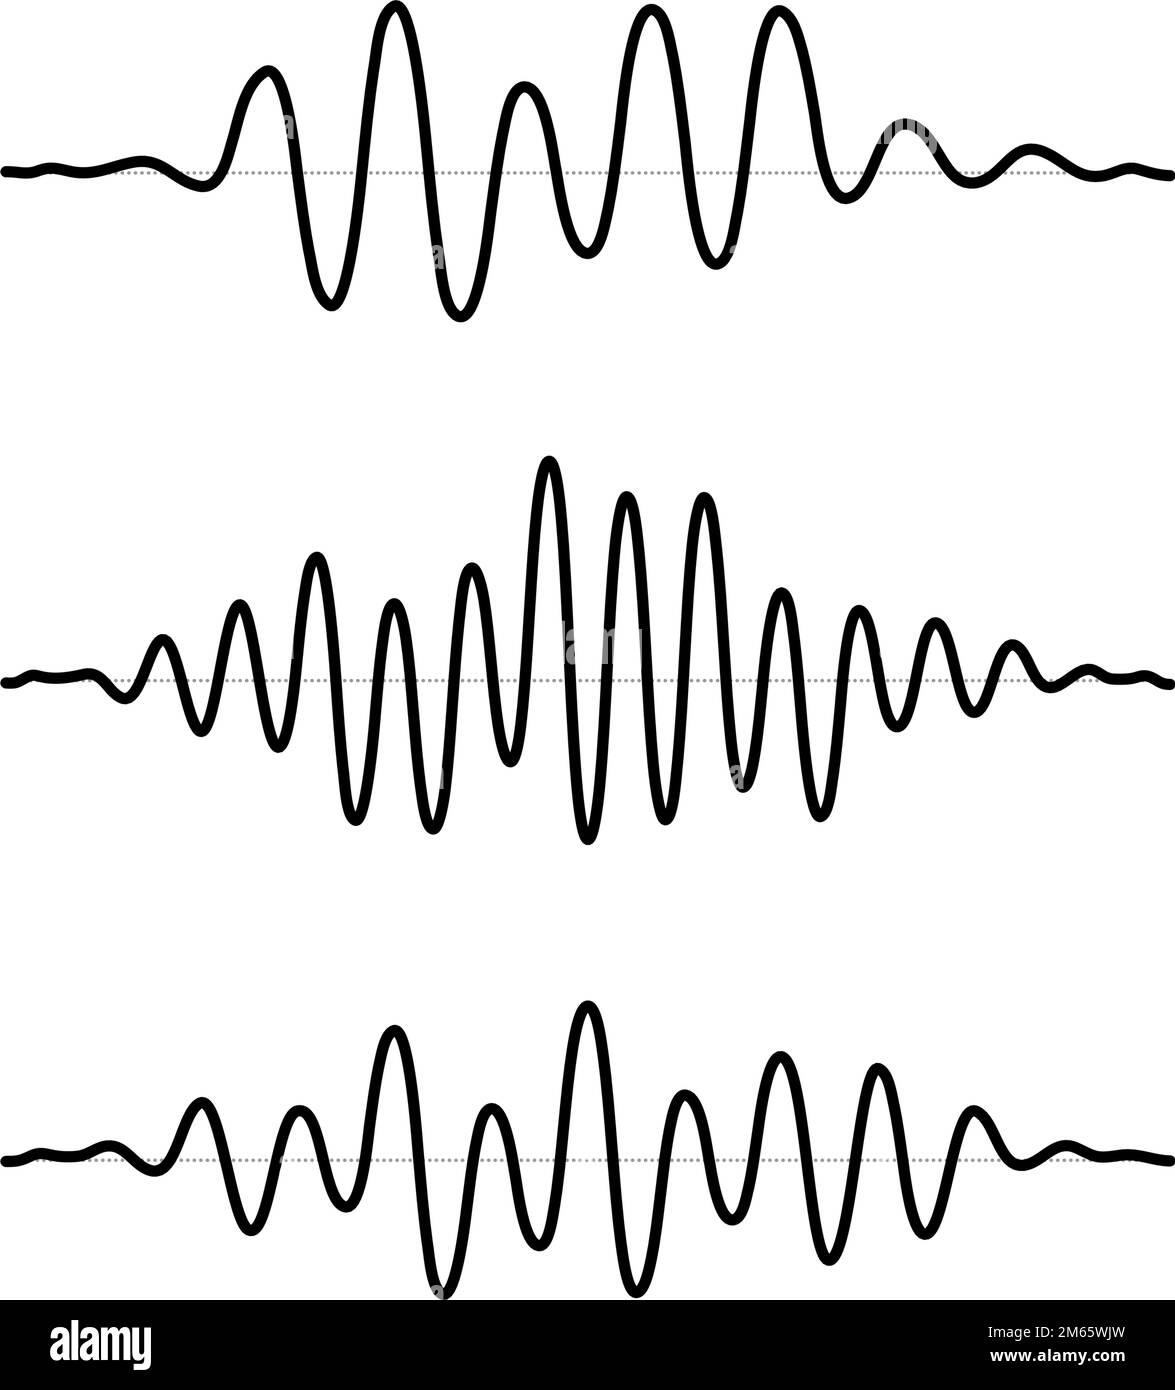 Sinusoid signal set. Black curve sound wave collection. Voice or music audio concept. Pulsating lines. Electronic radio graphics.  Stock Vector